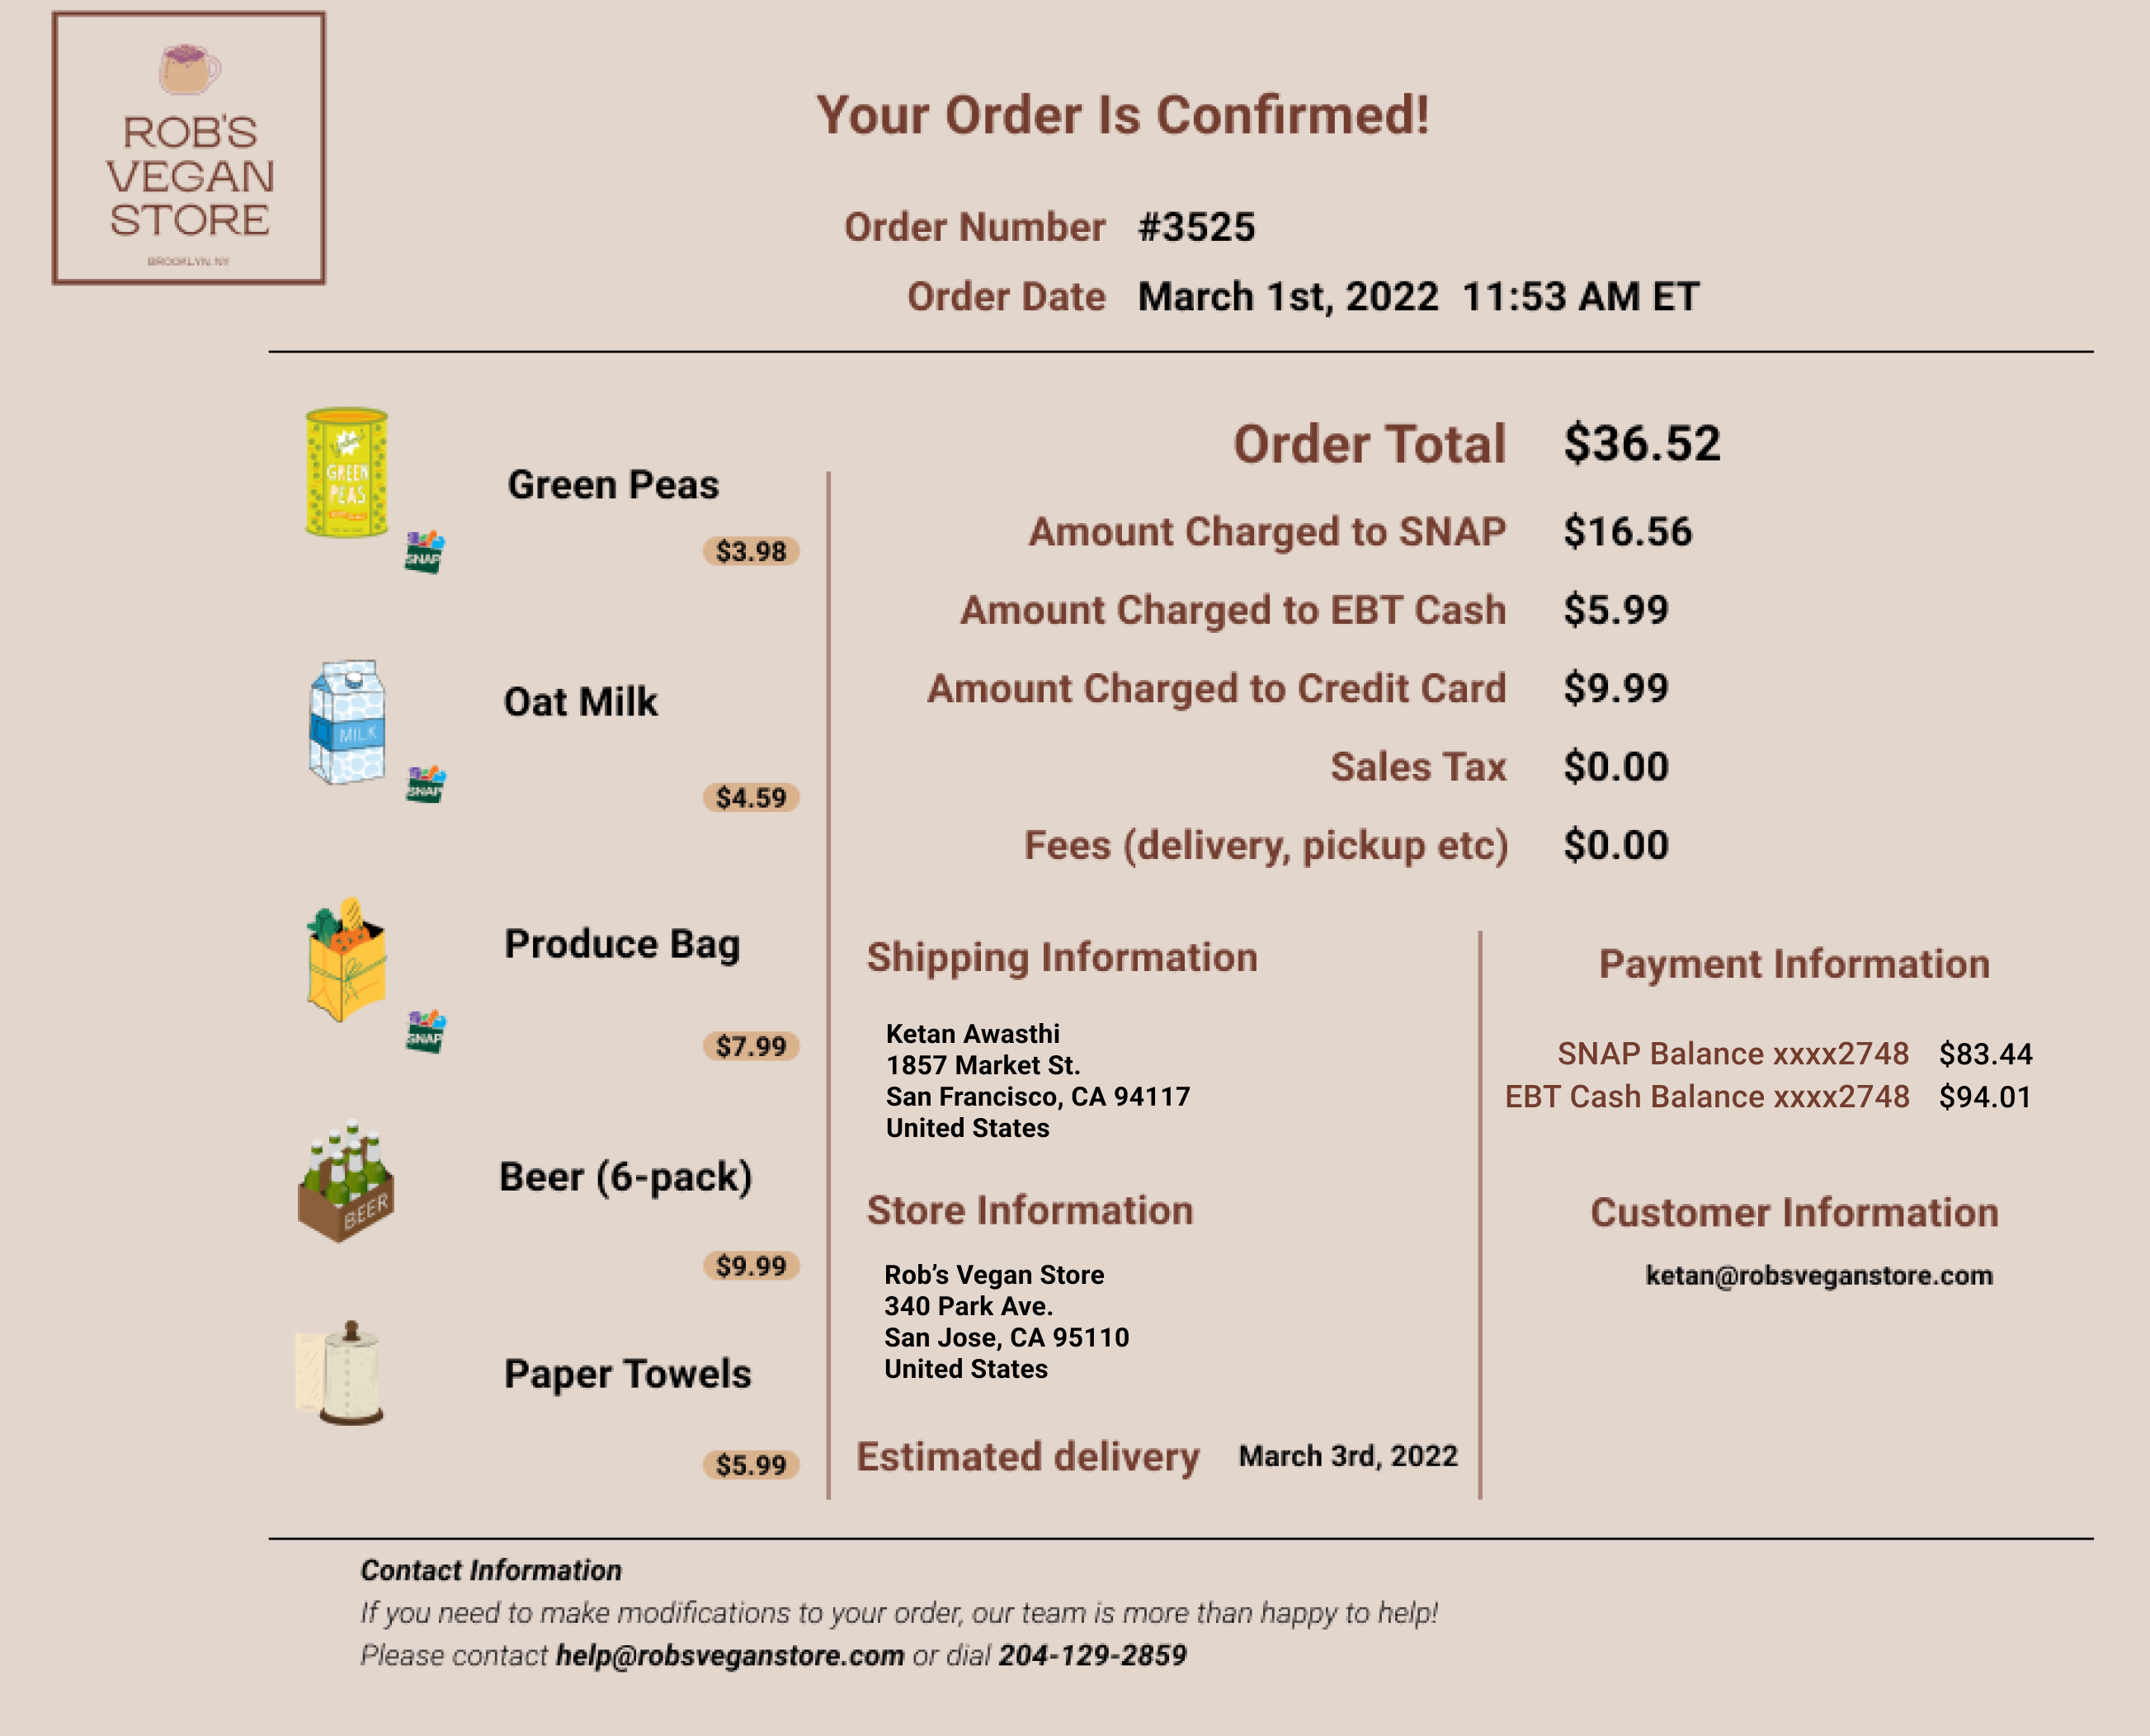 Order confirmation page from Rob's Vegan Store lists items purchased and amount charged to each tender in addition to other FNS requirements